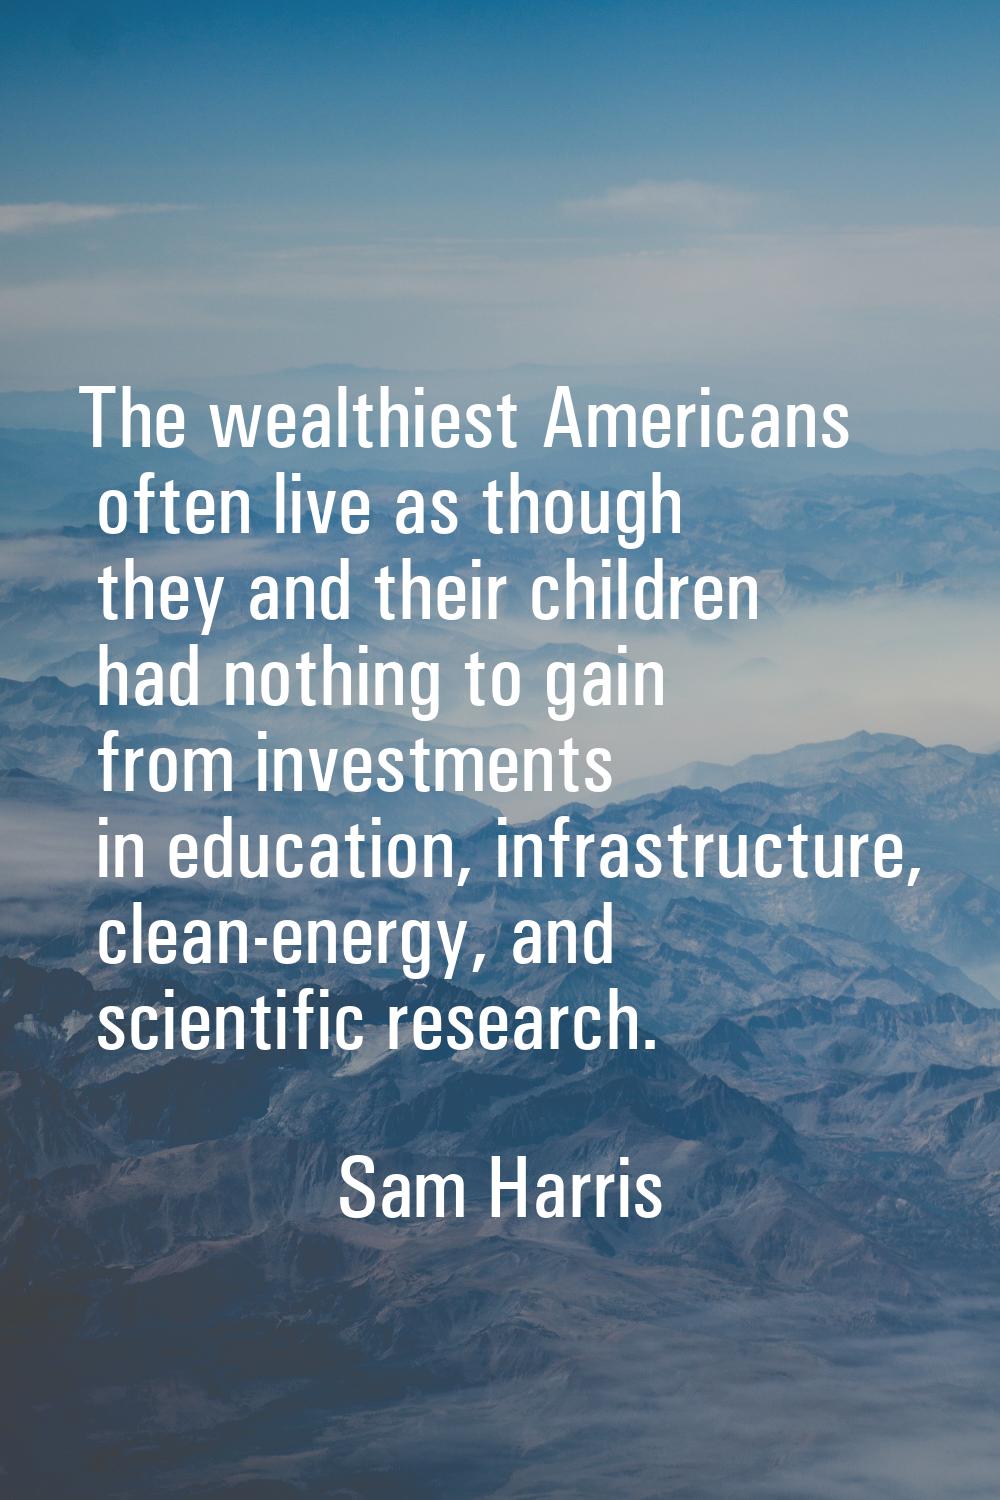 The wealthiest Americans often live as though they and their children had nothing to gain from inve